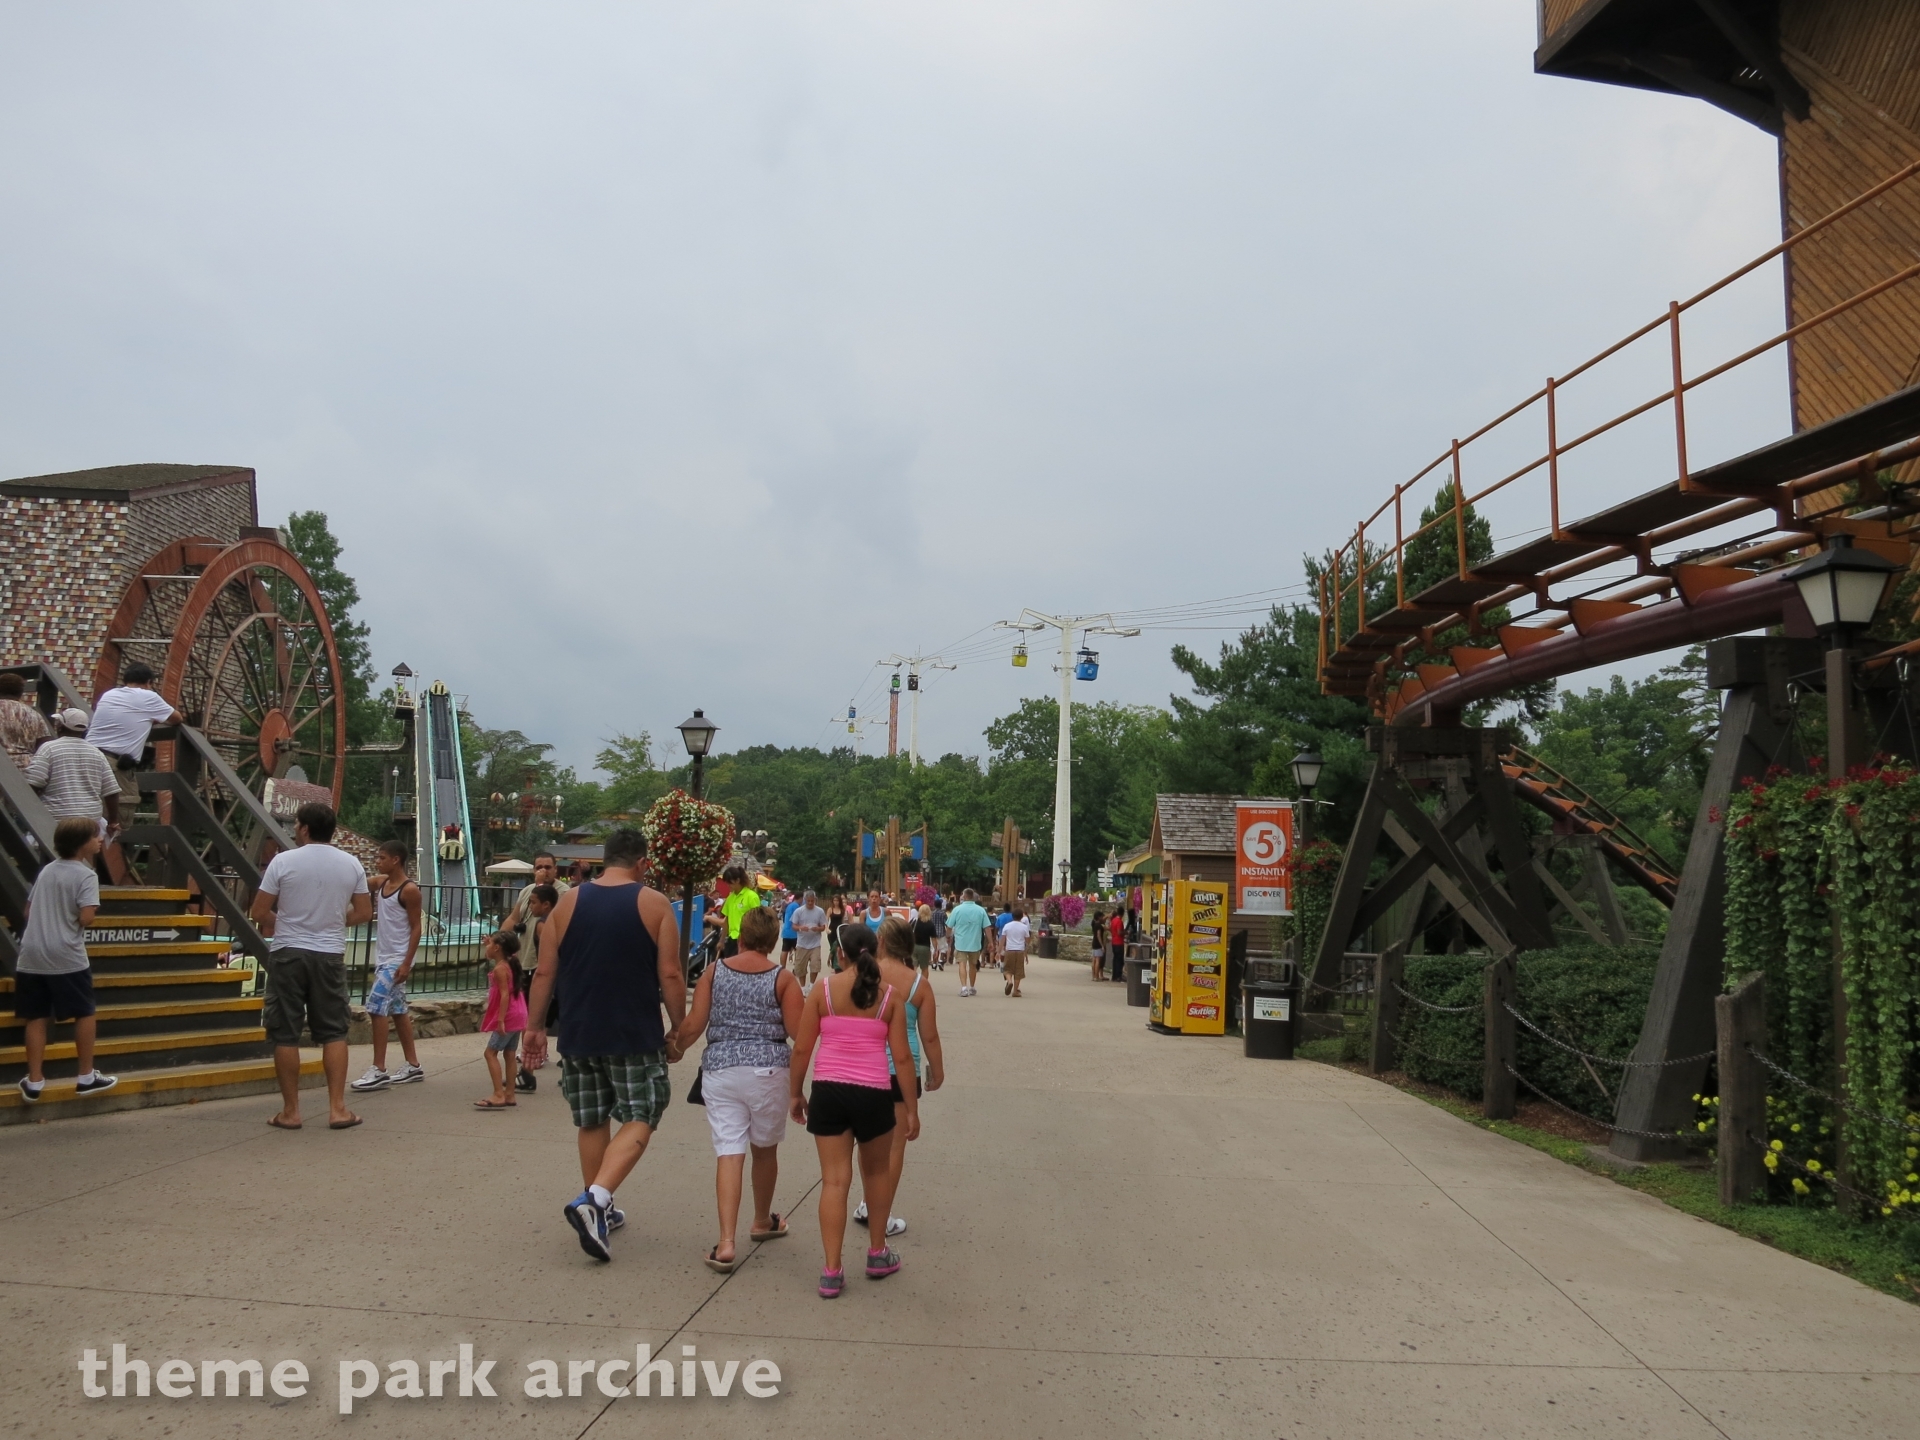 saw mill log flume ride at six flags great adventure